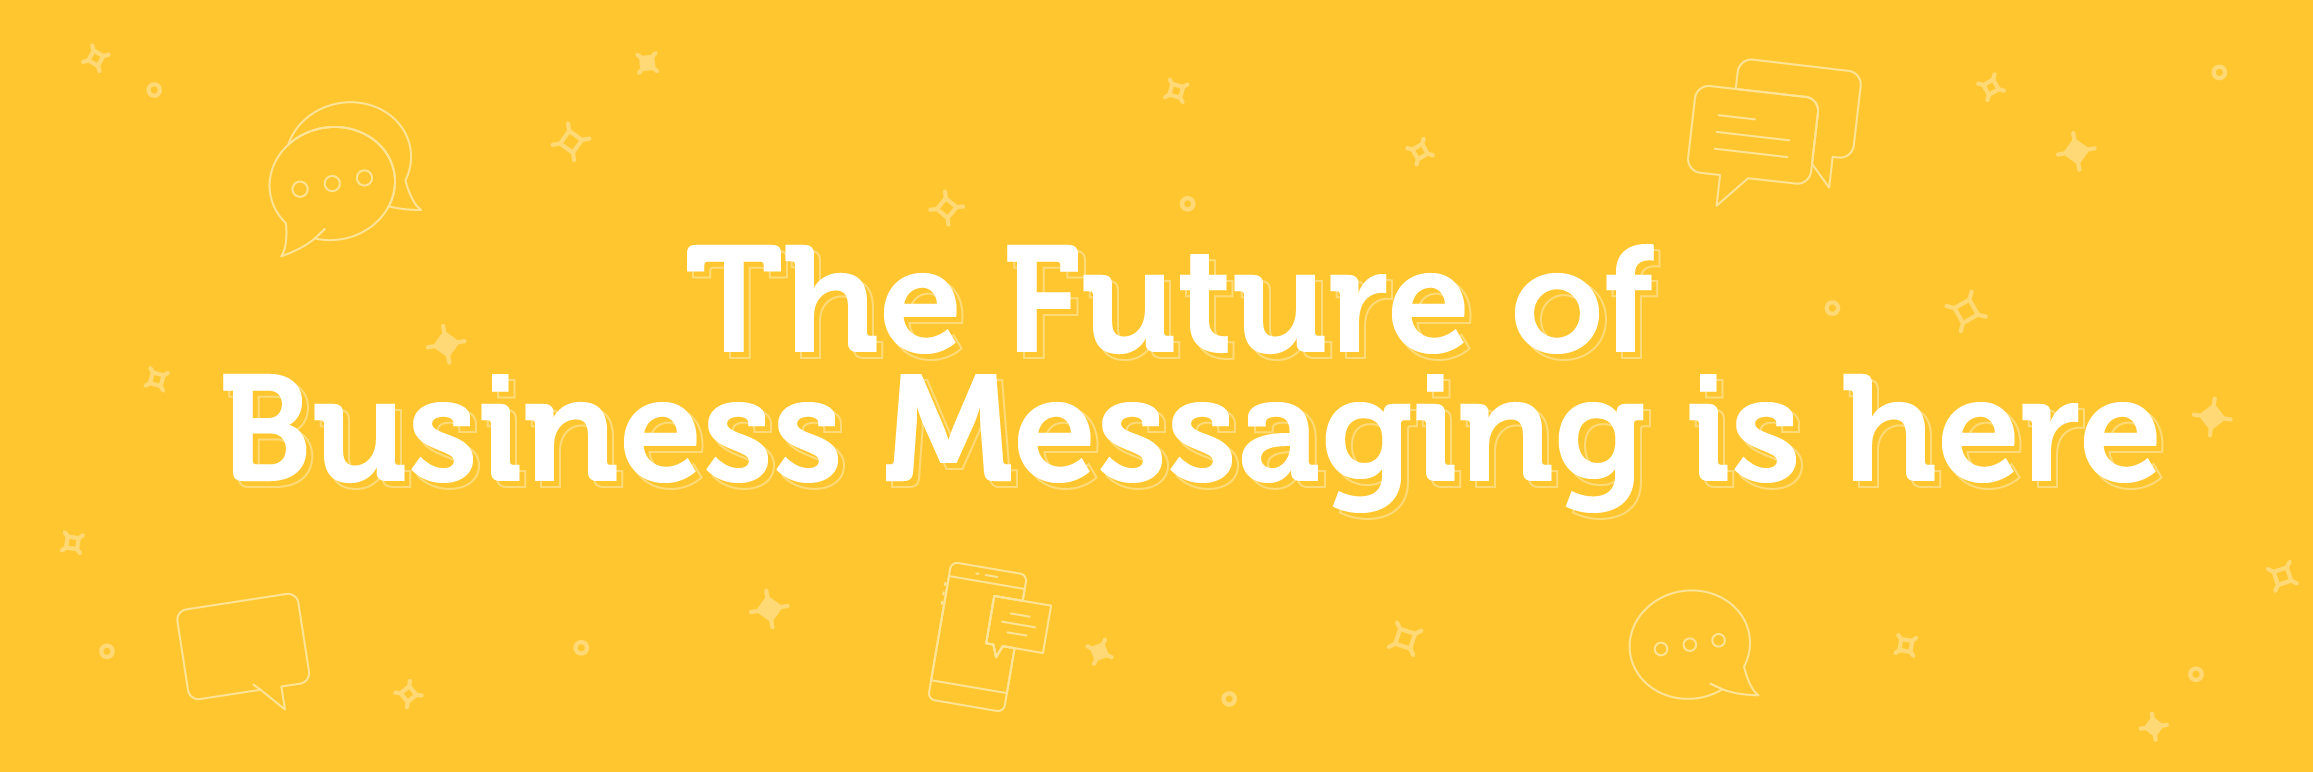 The future of business messaging